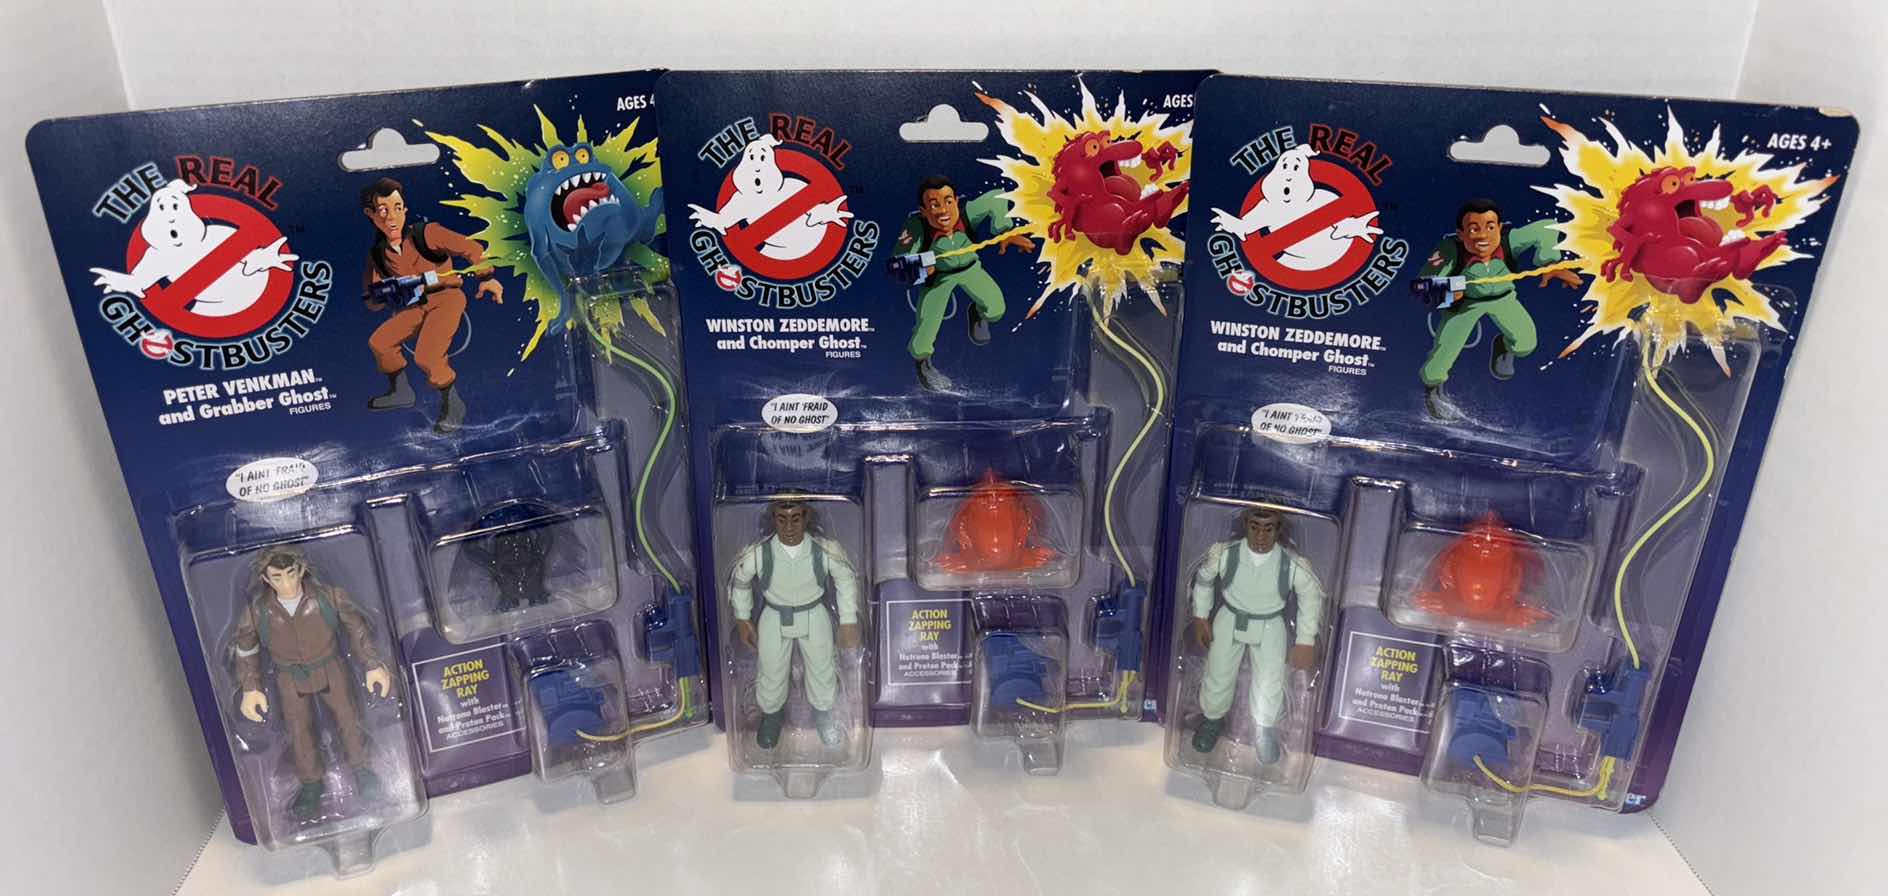 Photo 1 of NEW HASBRO KENNER THE REAL GHOSTBUSTERS ACTION FIGURE & ACCESSORIES 3-PACK, “PETER VENKMAN & GRABBER GHOST”, “WINSTON ZEDDEMORE & CHOMPER GHOST” x 2